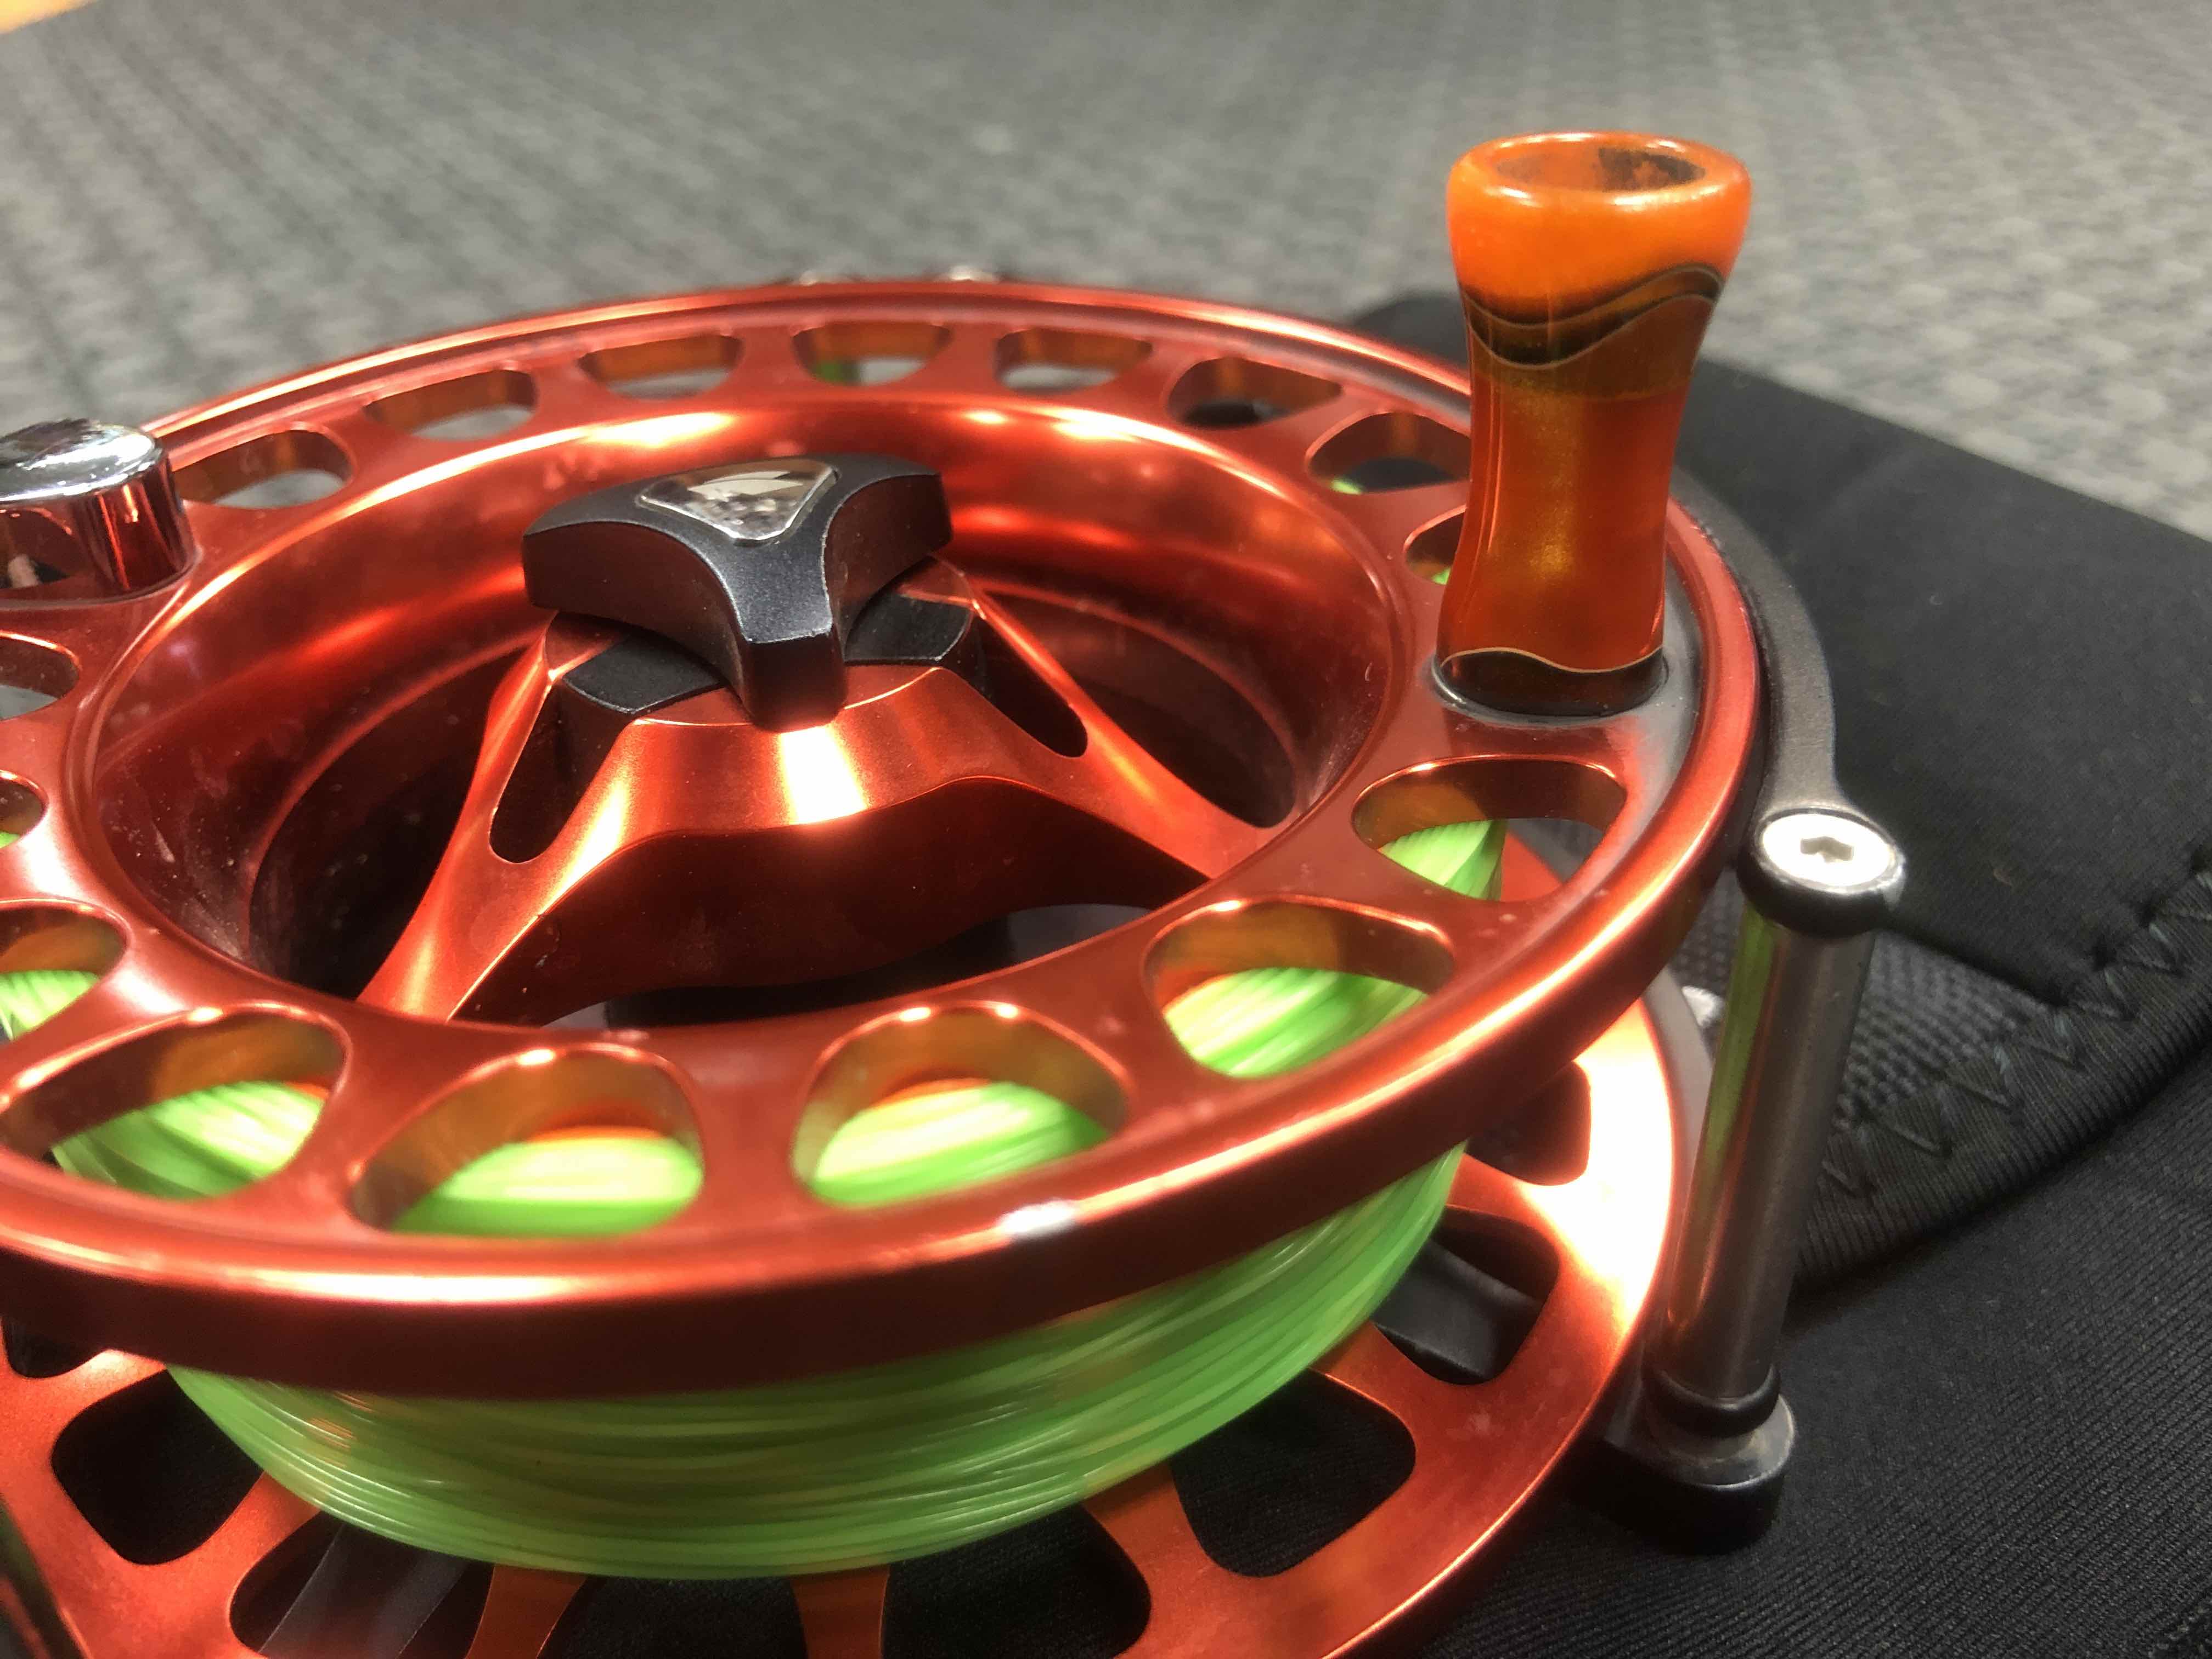 https://thefirstcast.ca/wp-content/uploads/2019/11/Salt-water-Fly-Reel-Custom-Handle-cw-Backing-and-OPST-Running-Line-CC.jpg